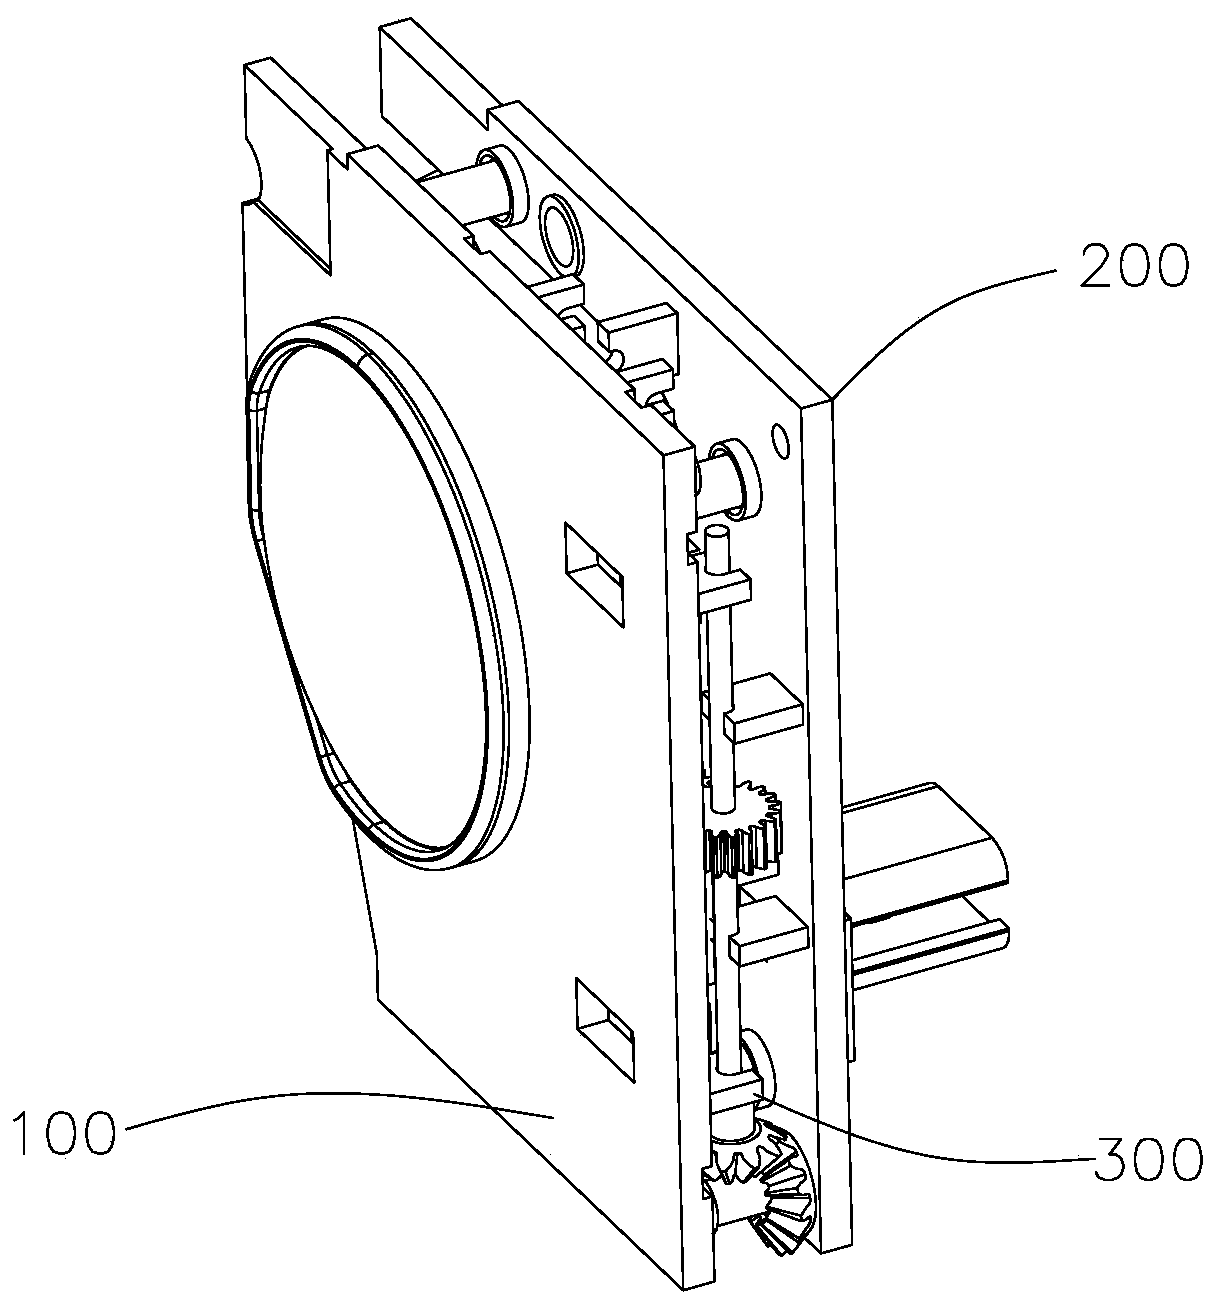 Visual accommodation apparatus applied to HMD equipment